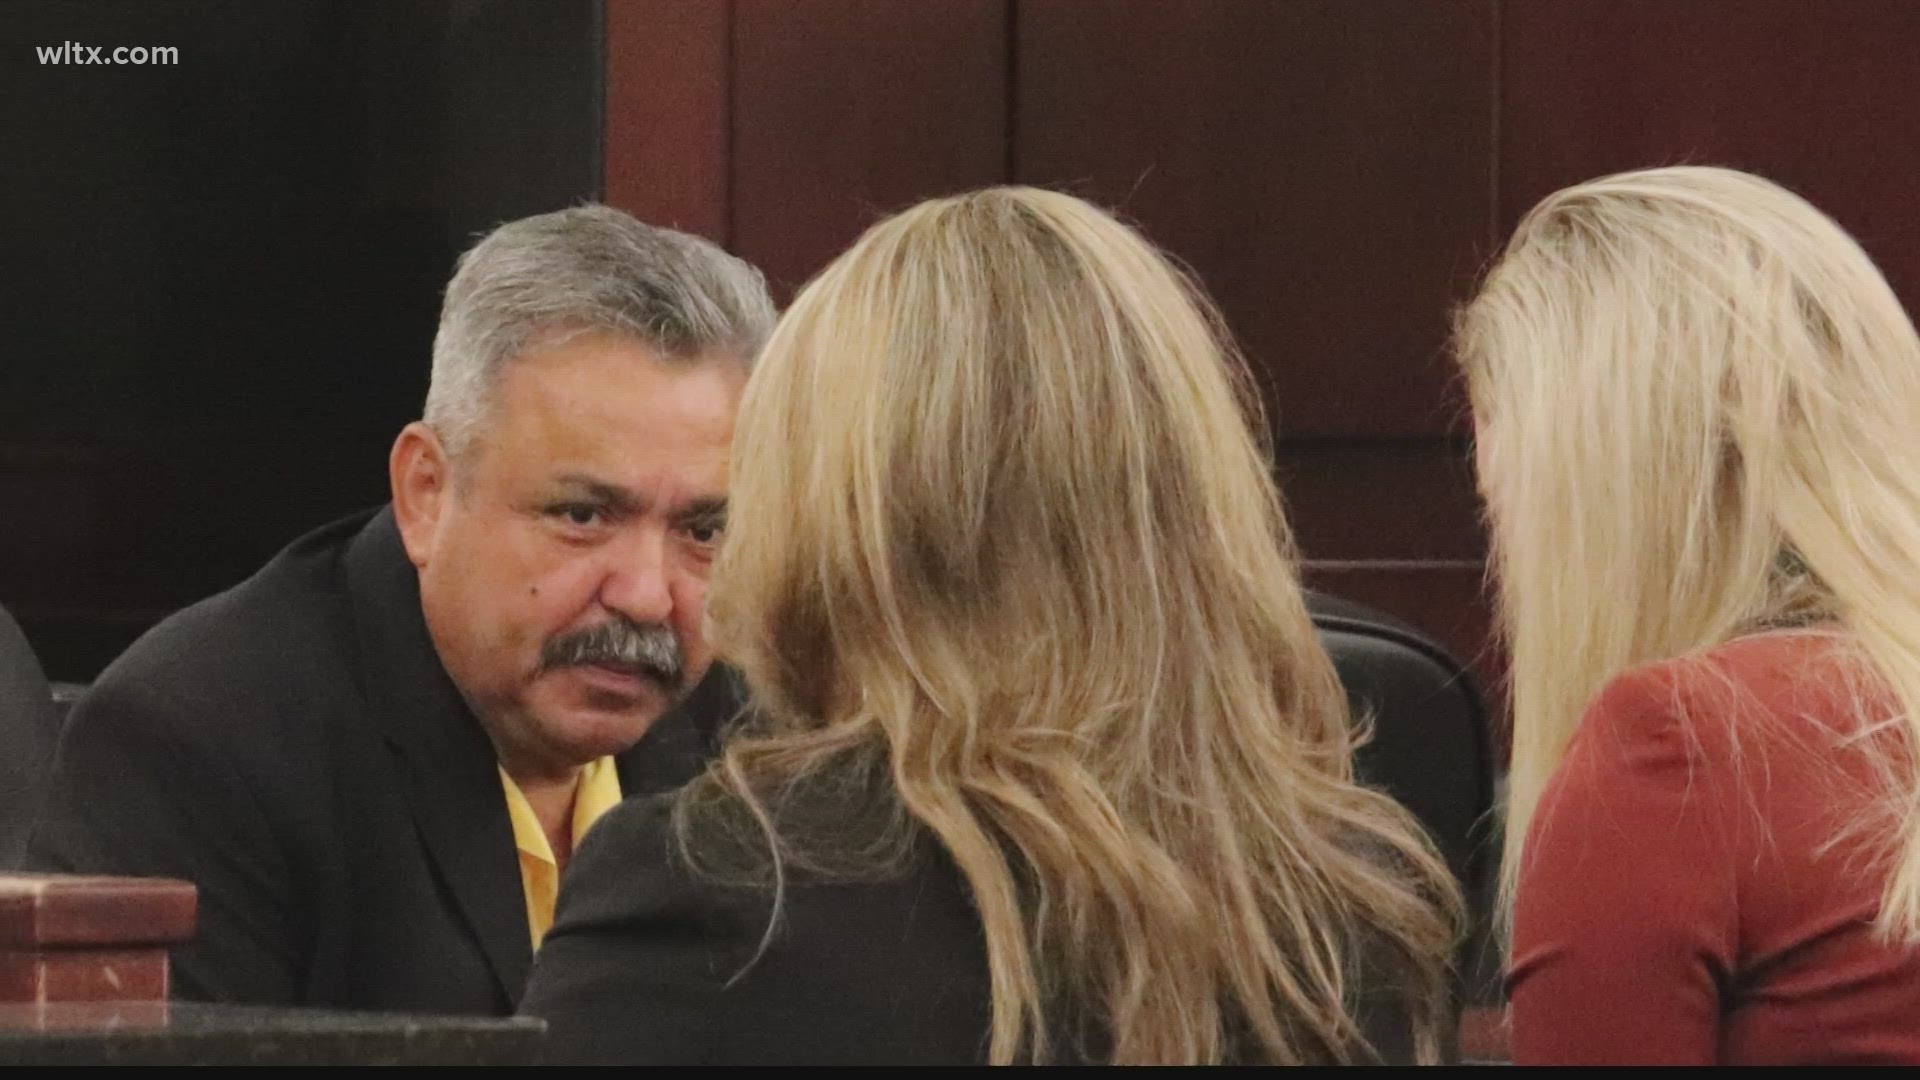 The state rested its case against Lexington restauranteur Greg Leon. Now, the defense is gearing up to call its first witness on Monday morning.